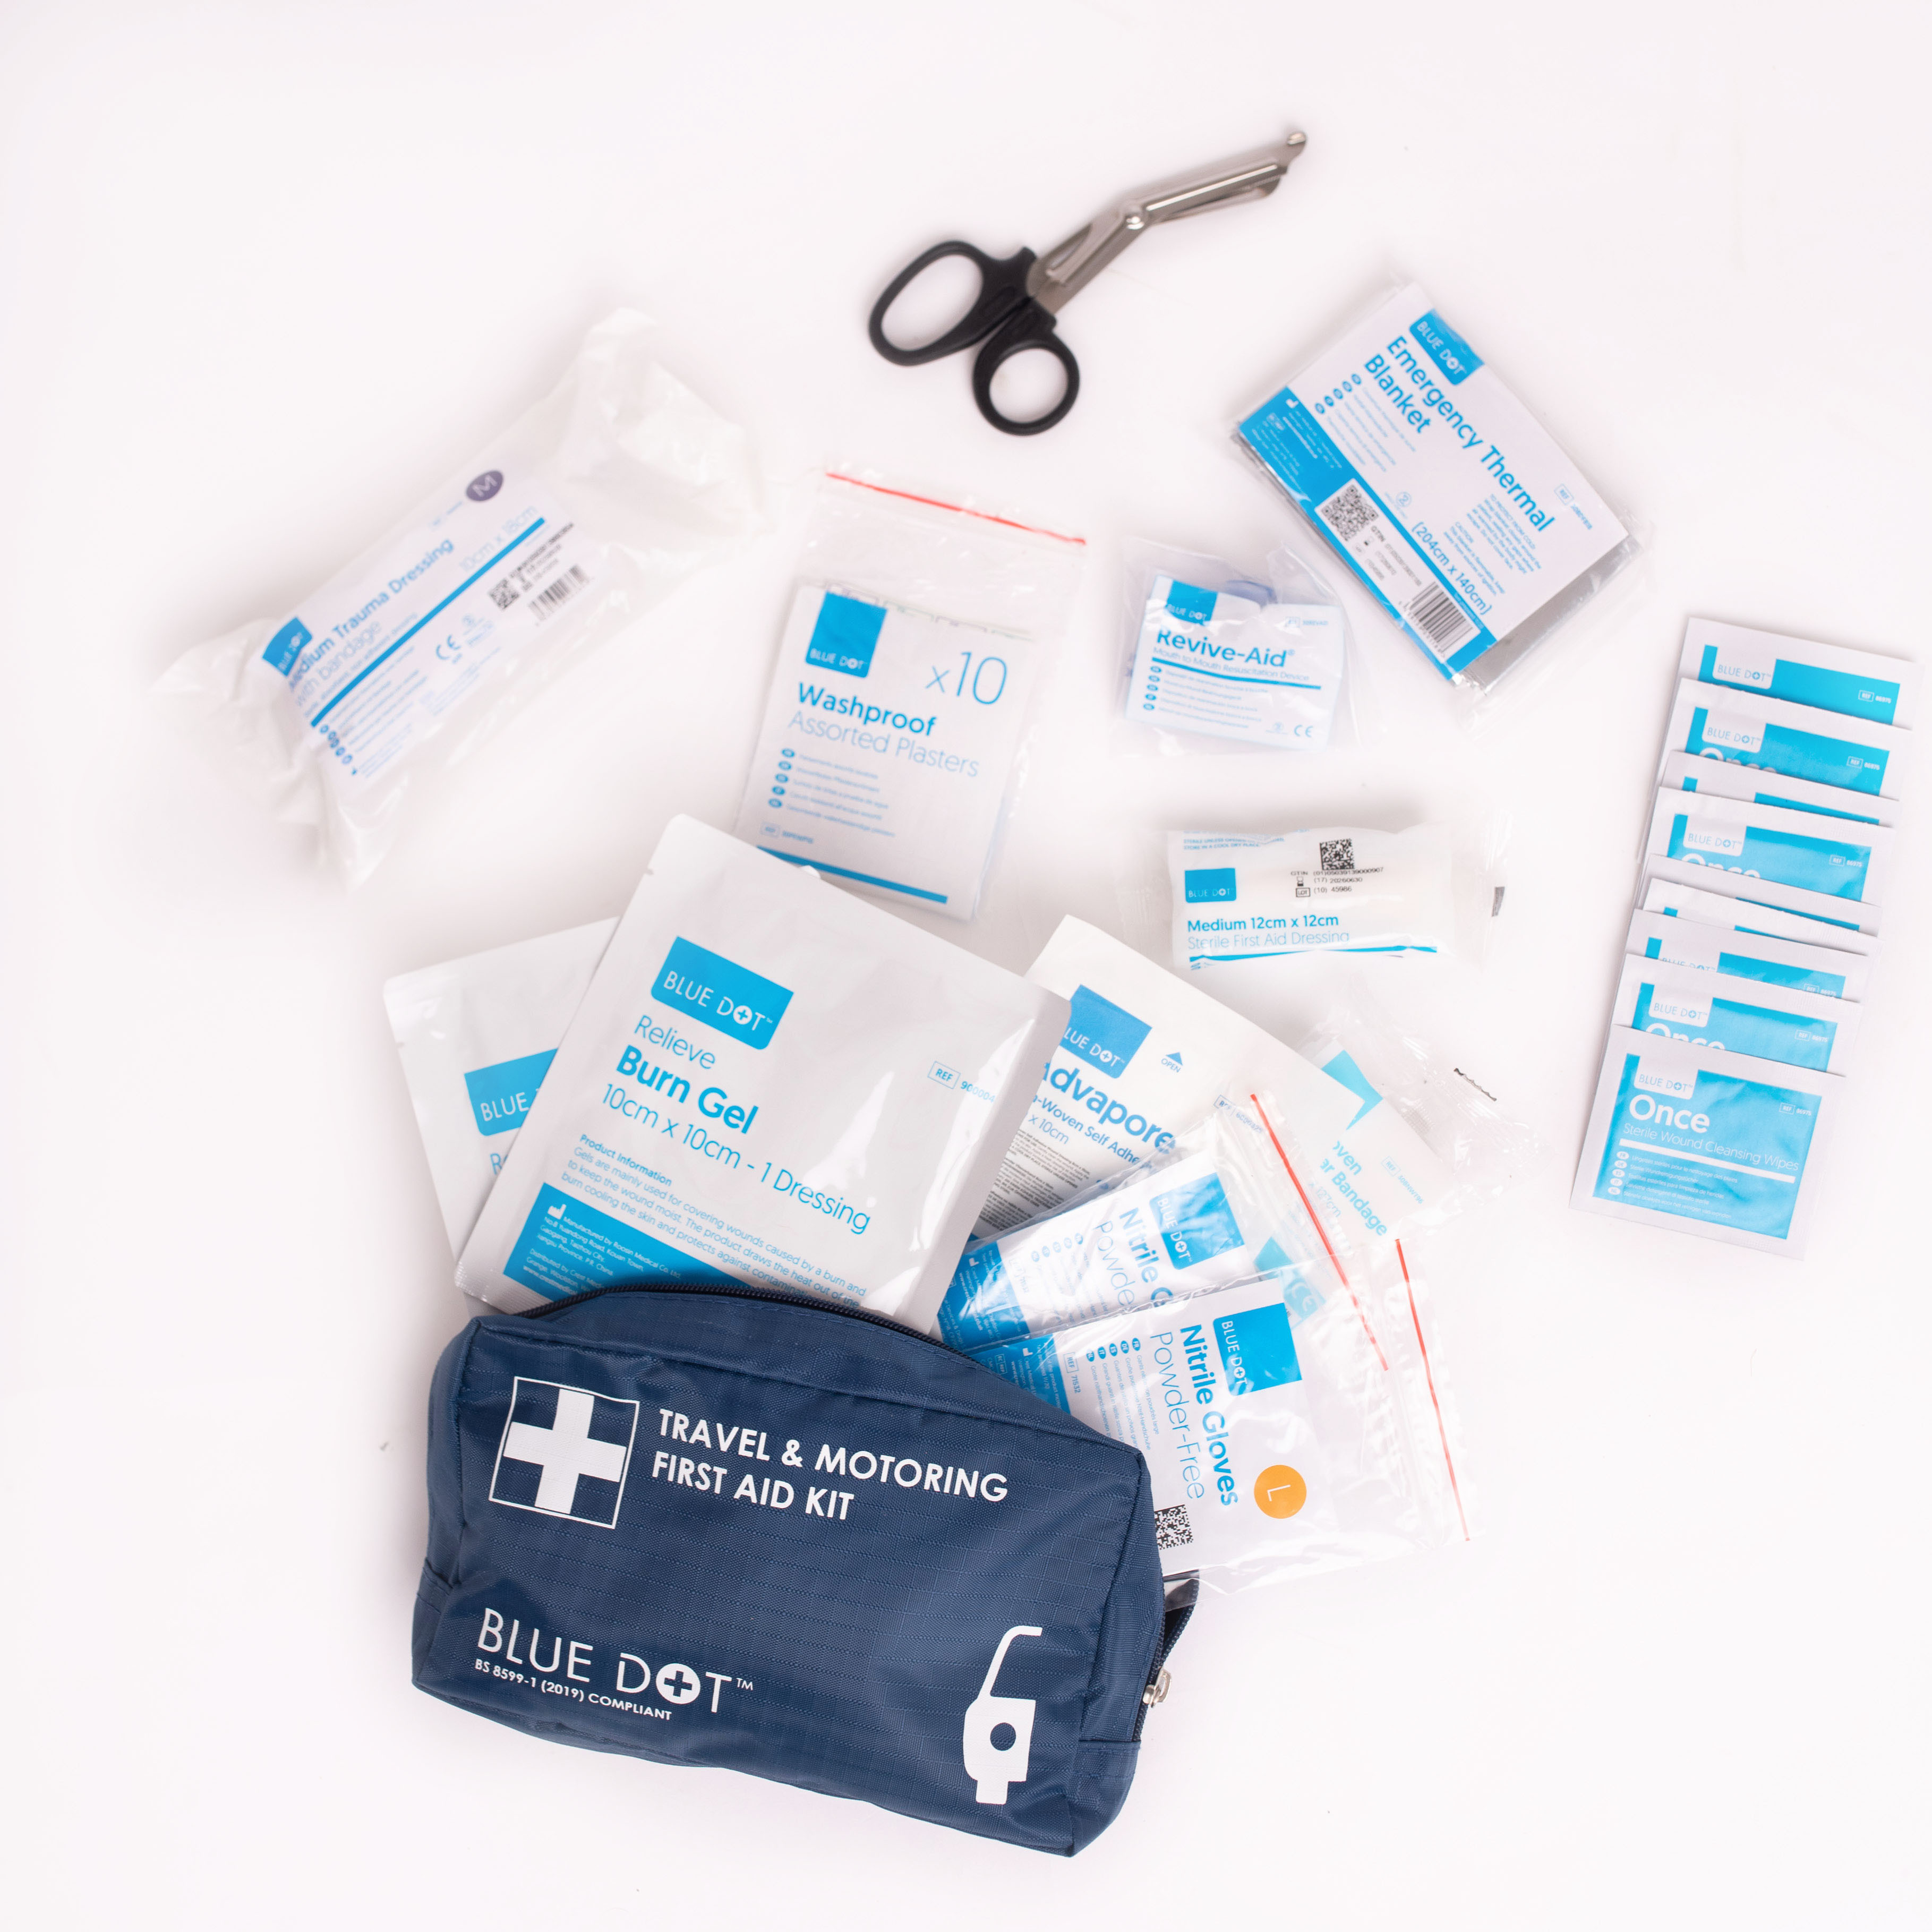 BS 8599-1 Travel & Motoring First Aid Kit